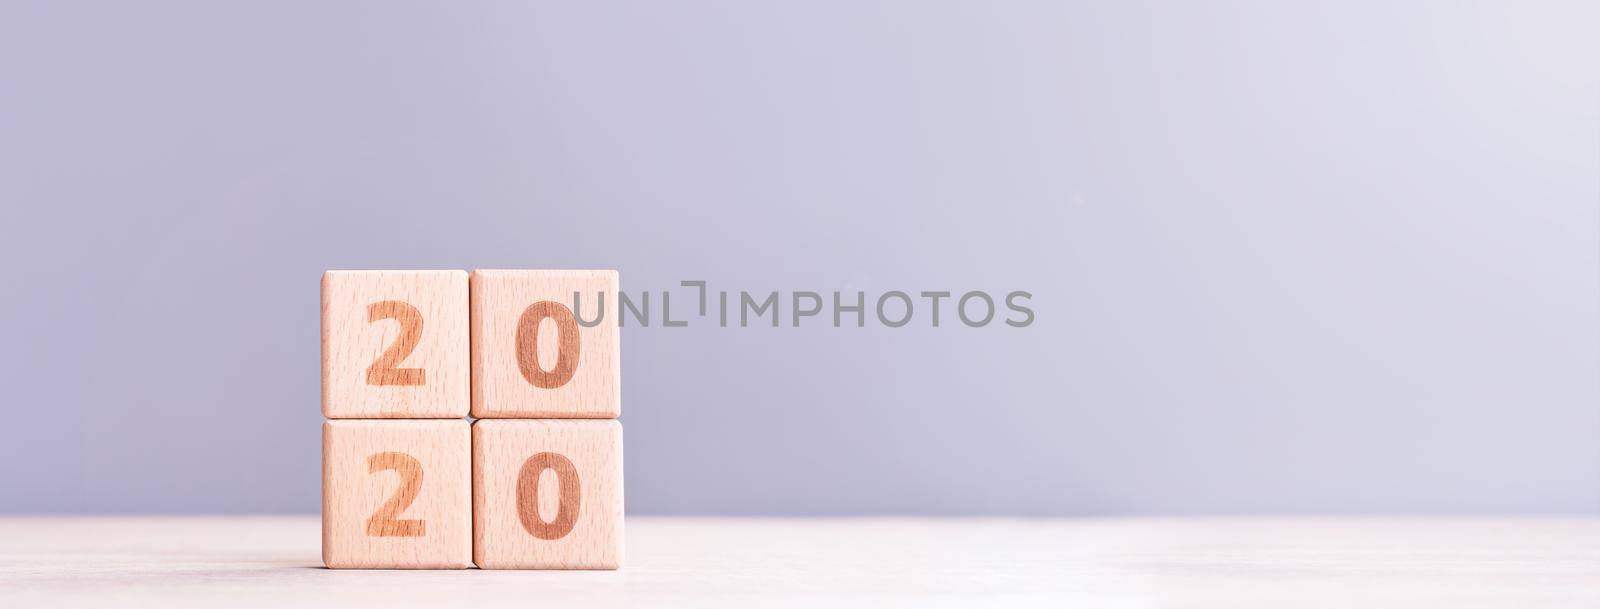 Abstract 2020, 2019 New year target plan design concept - wood blocks cubes on wooden table and pastel blue background, close up, blank copy space.